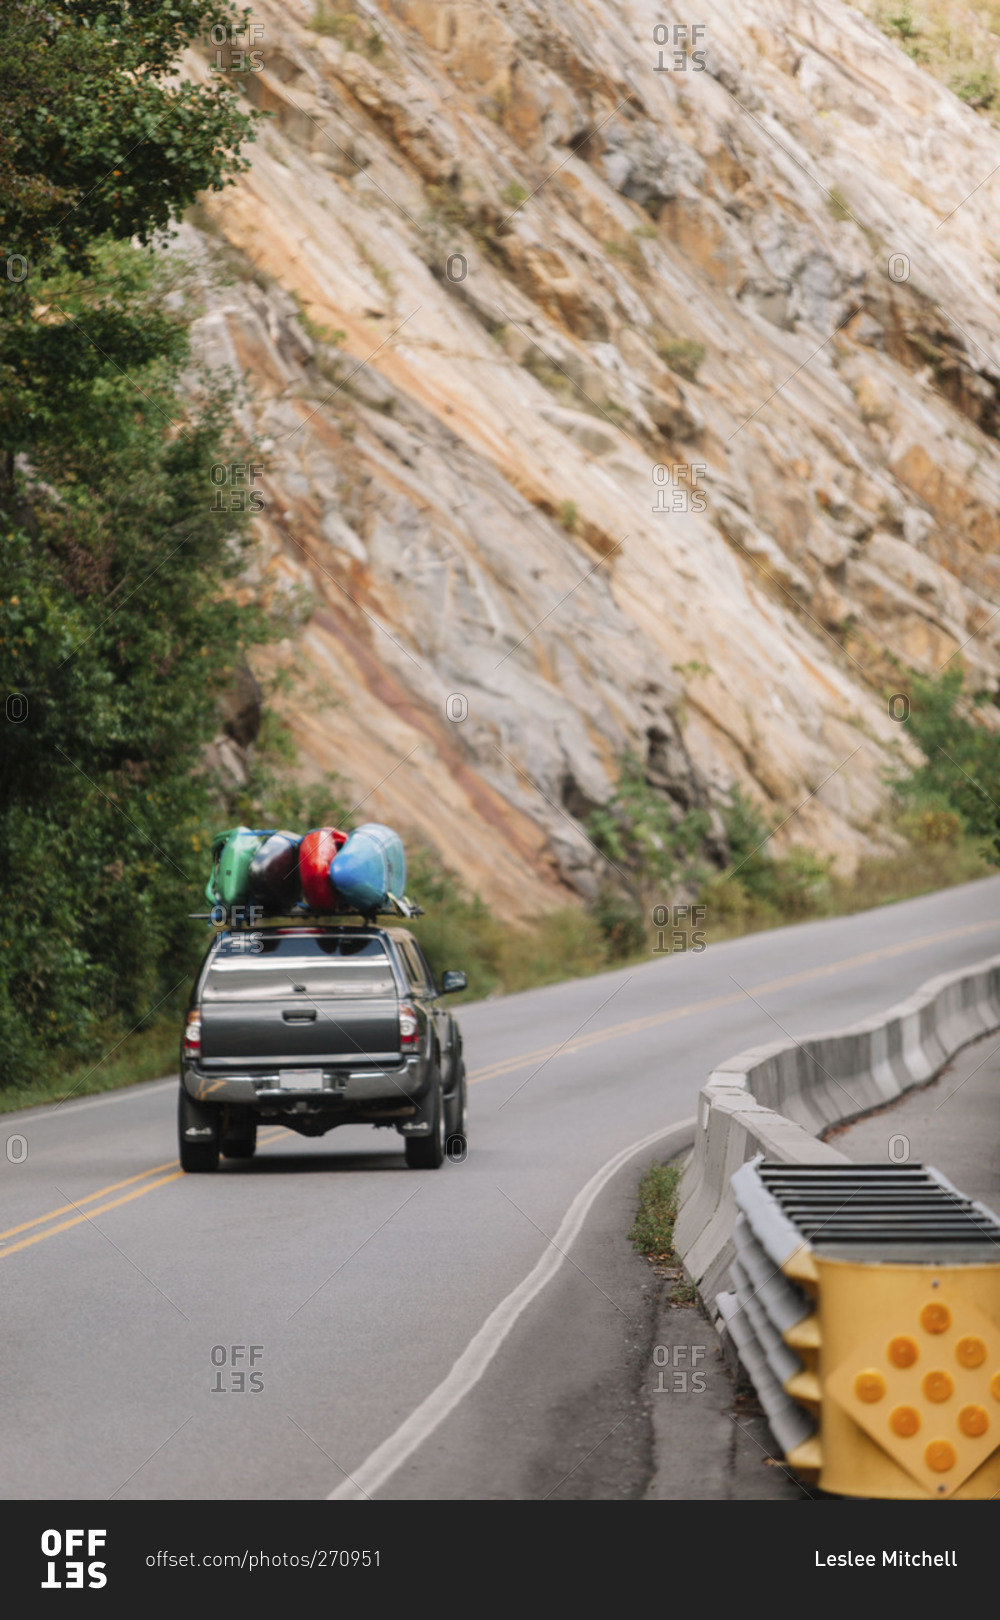 Truck with kayaks traveling on a mountain road